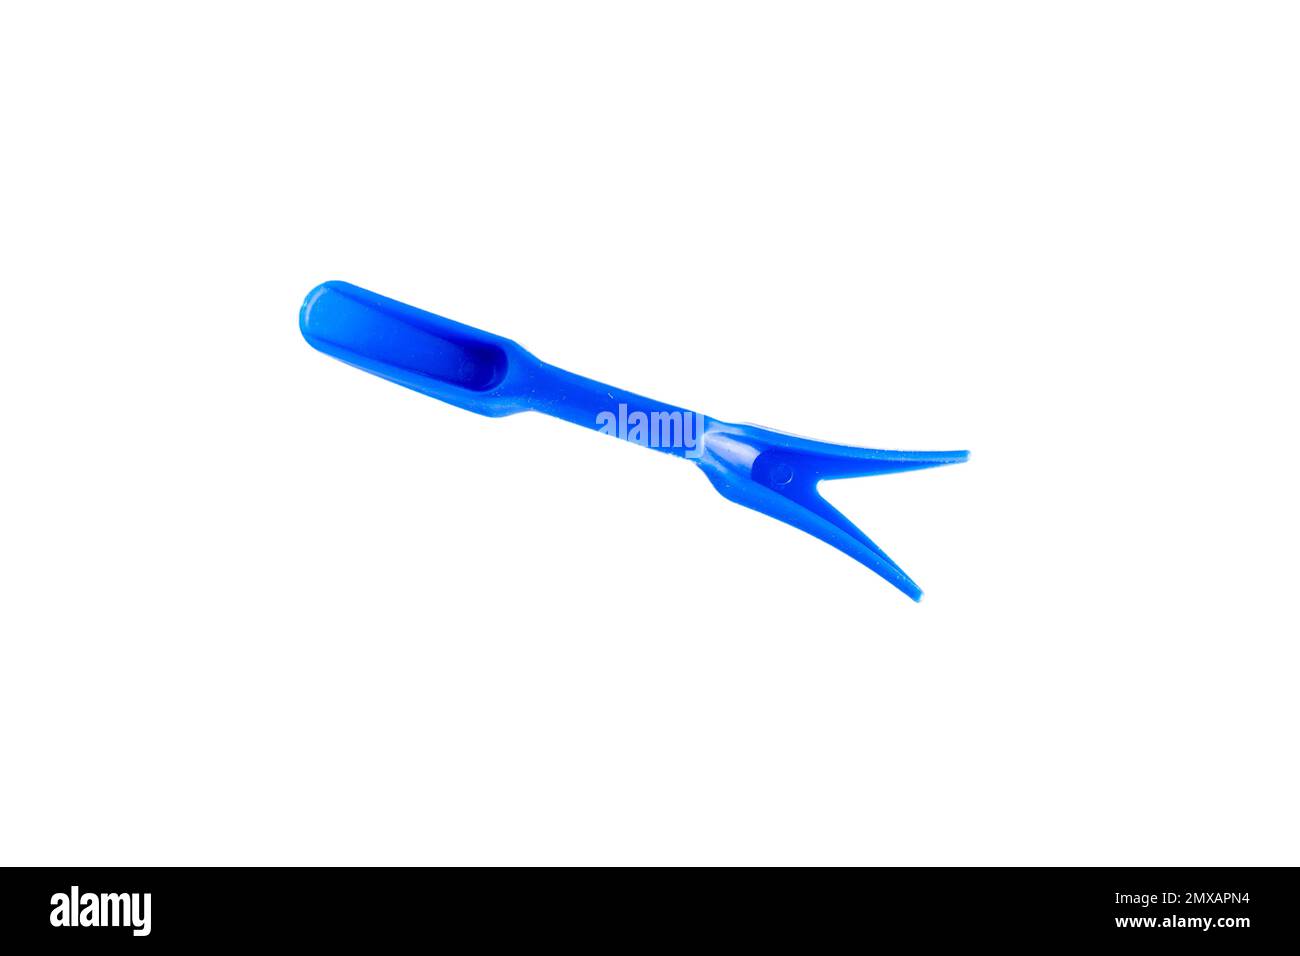 Blue plastic fork for cactus or succulents lifter with a small shovel on the other gardening tool Stock Photo